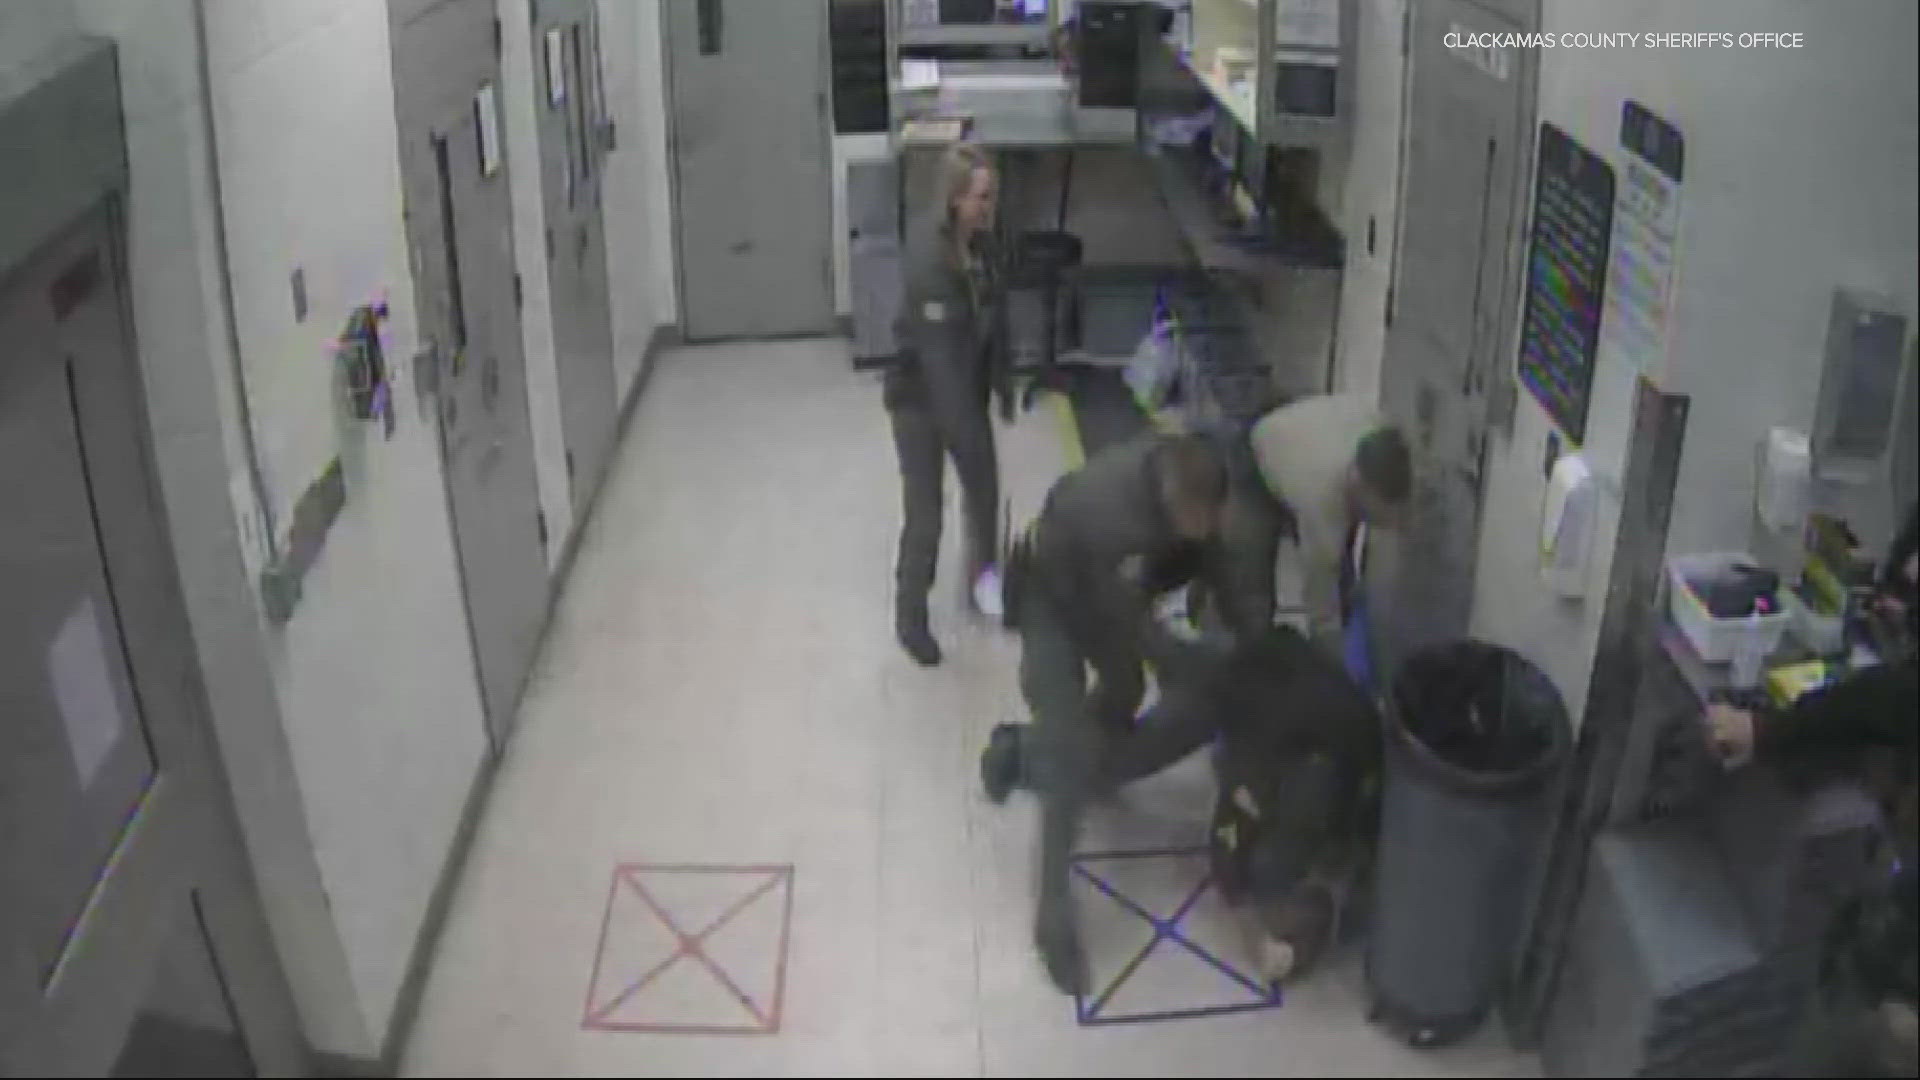 Video shows Sgt. James Williams slamming Travis Craig's head into a metal shelf then onto the floor of the county jail. Now Craig is suing the county.